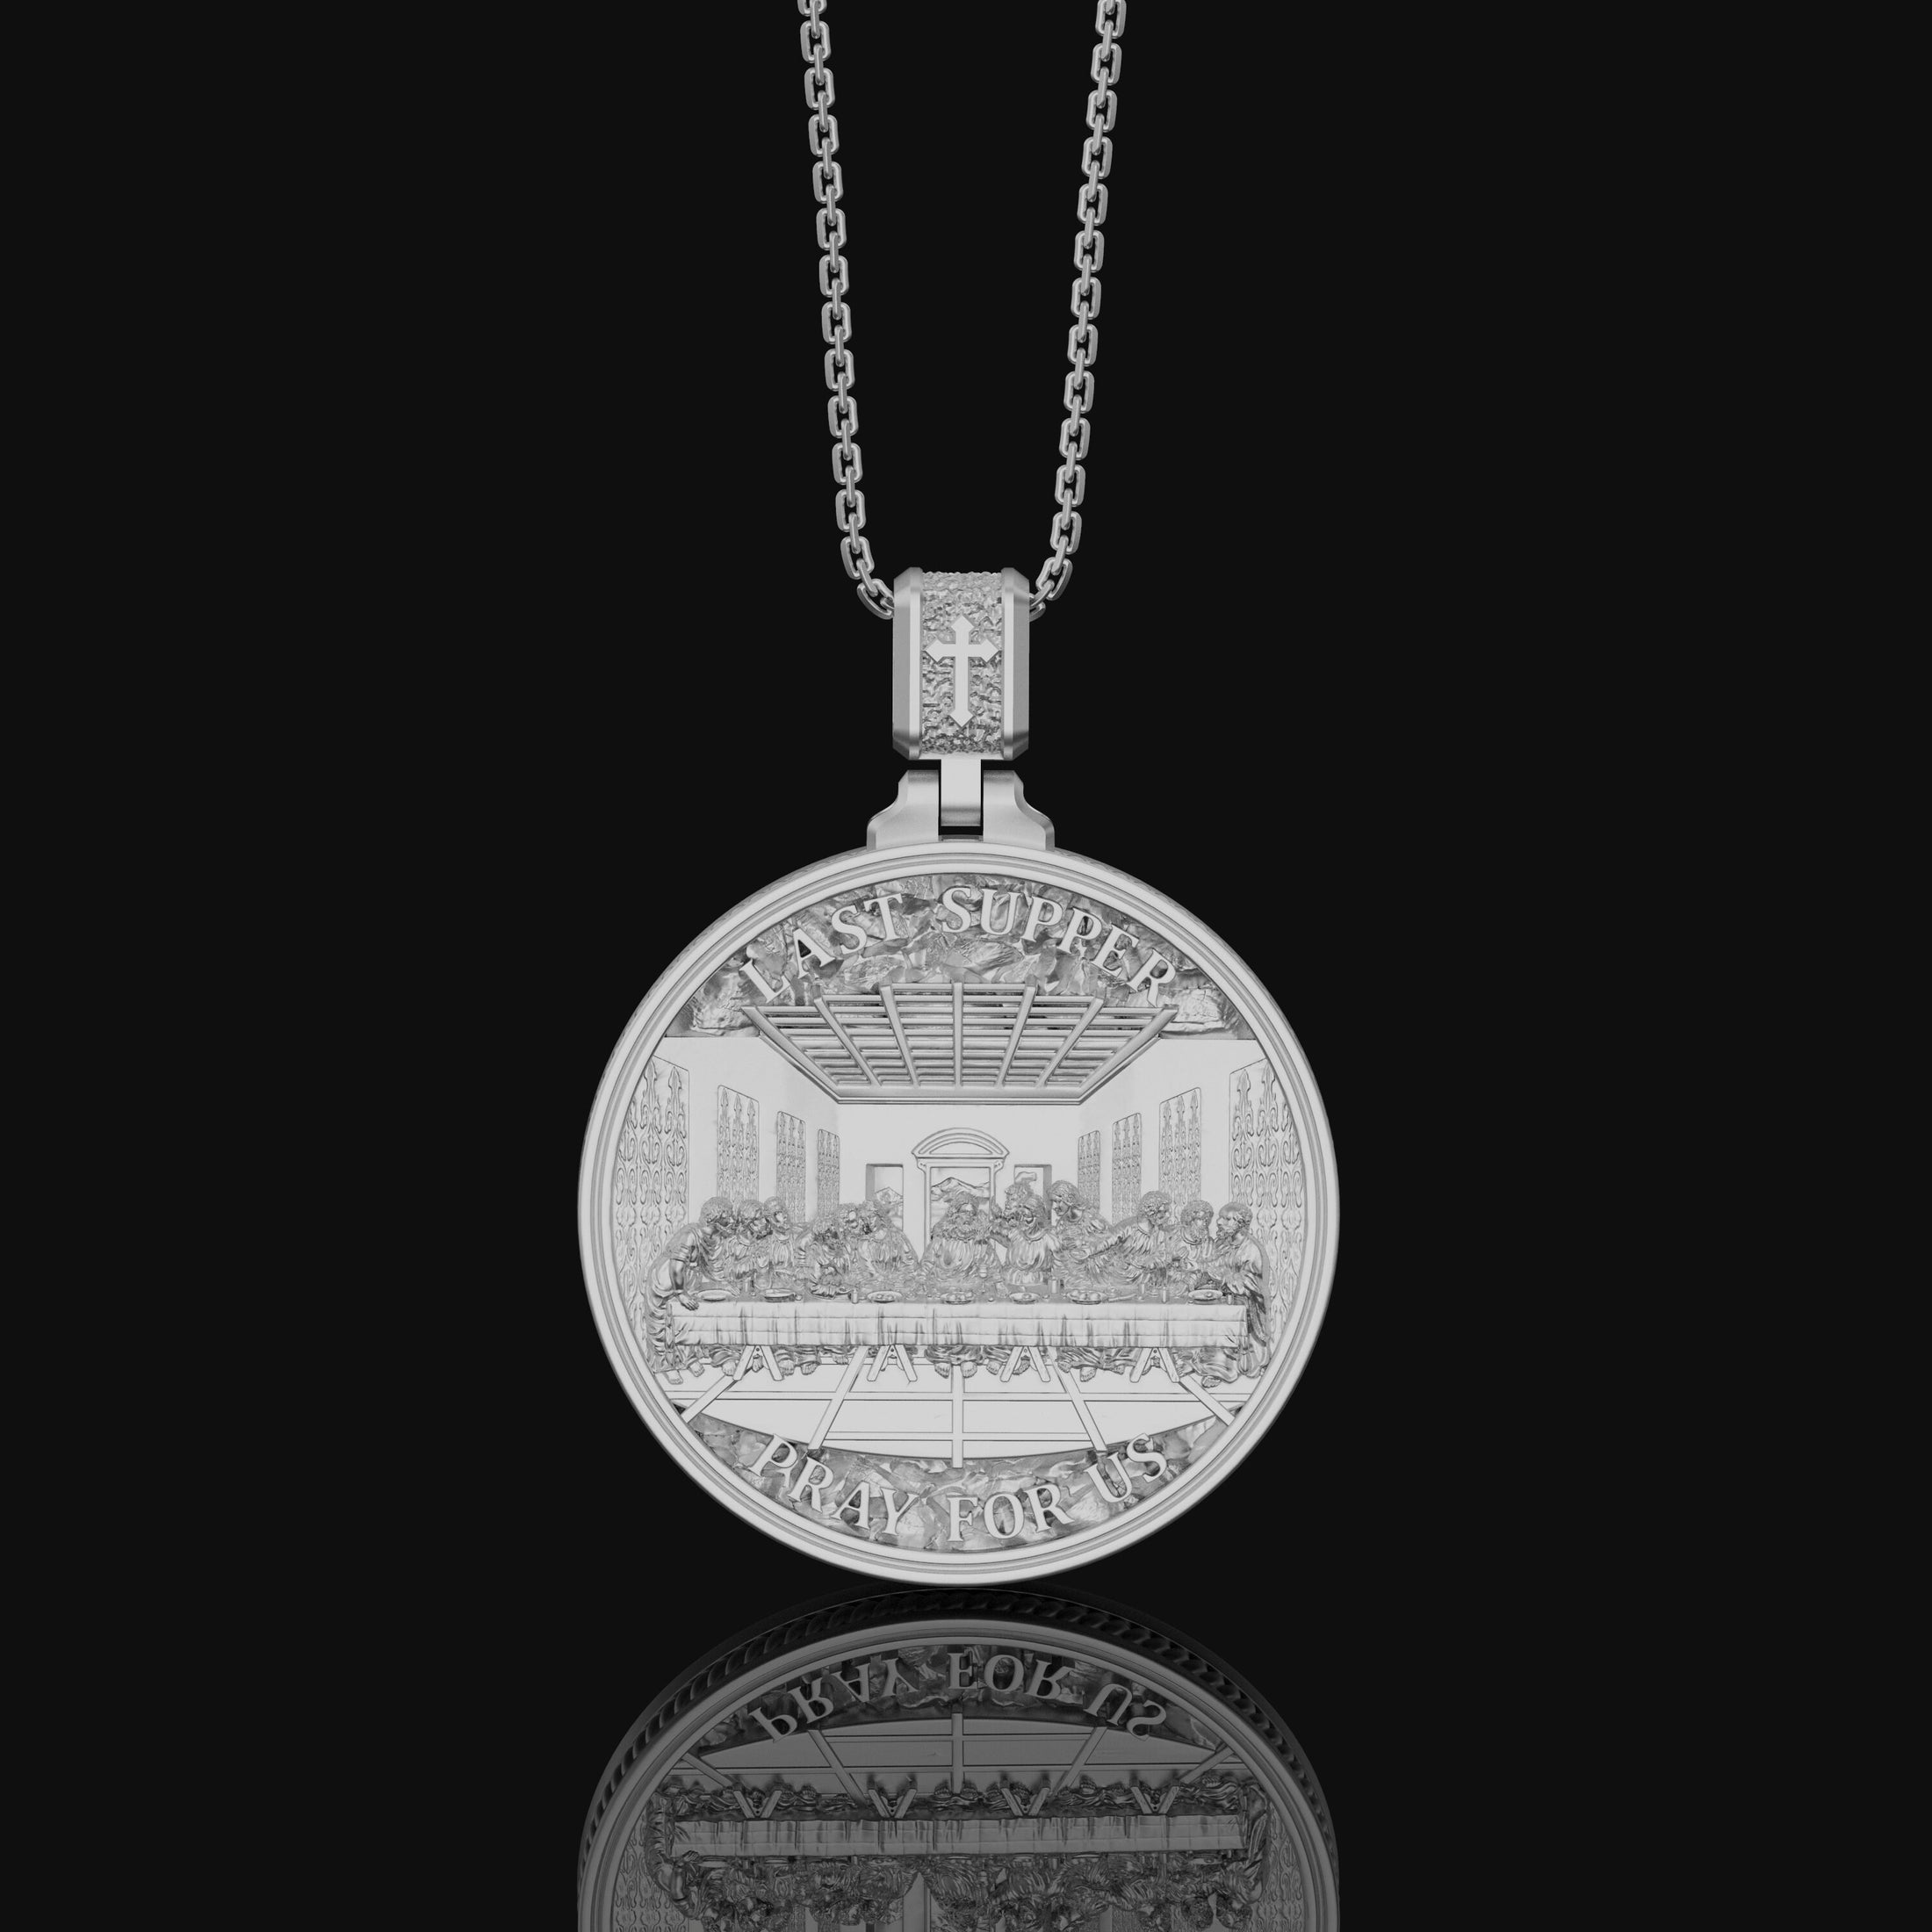 Last Supper Medallion - Sacred Biblical Pendant, Religious Christian Medal, Holy Supper Charm, Spiritual Faithful Jewelry